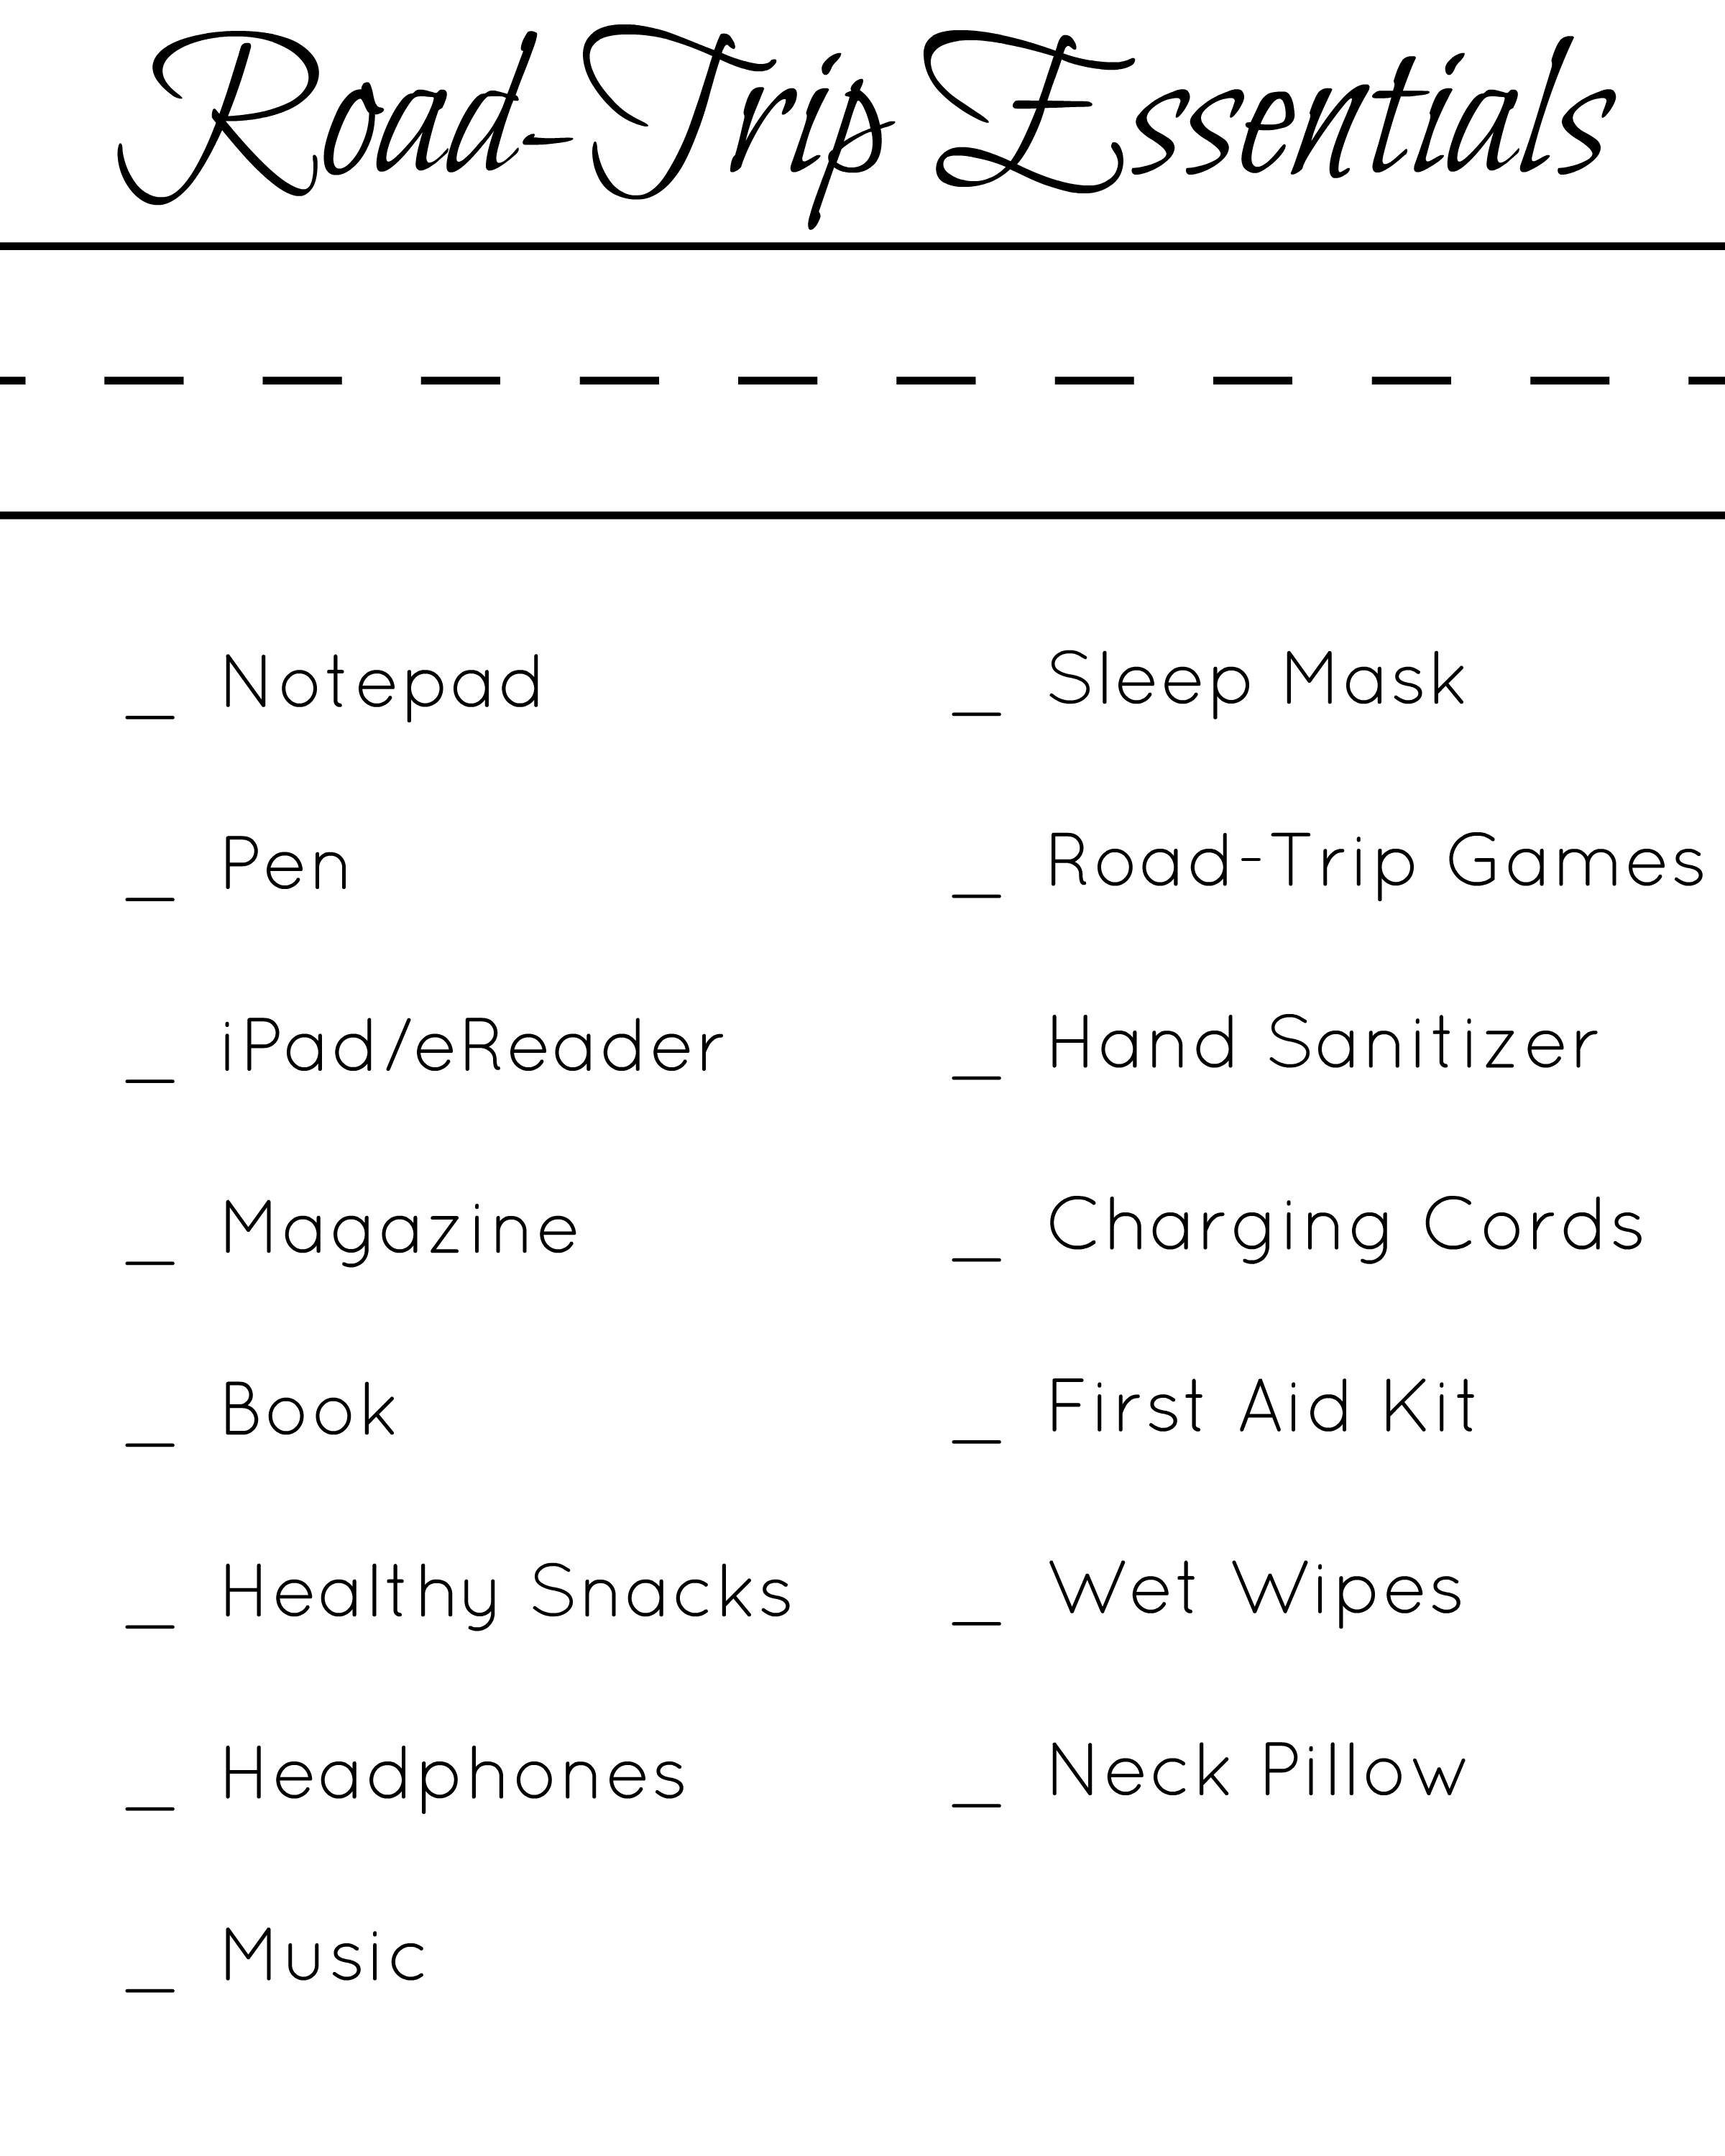 packing list for long road trip